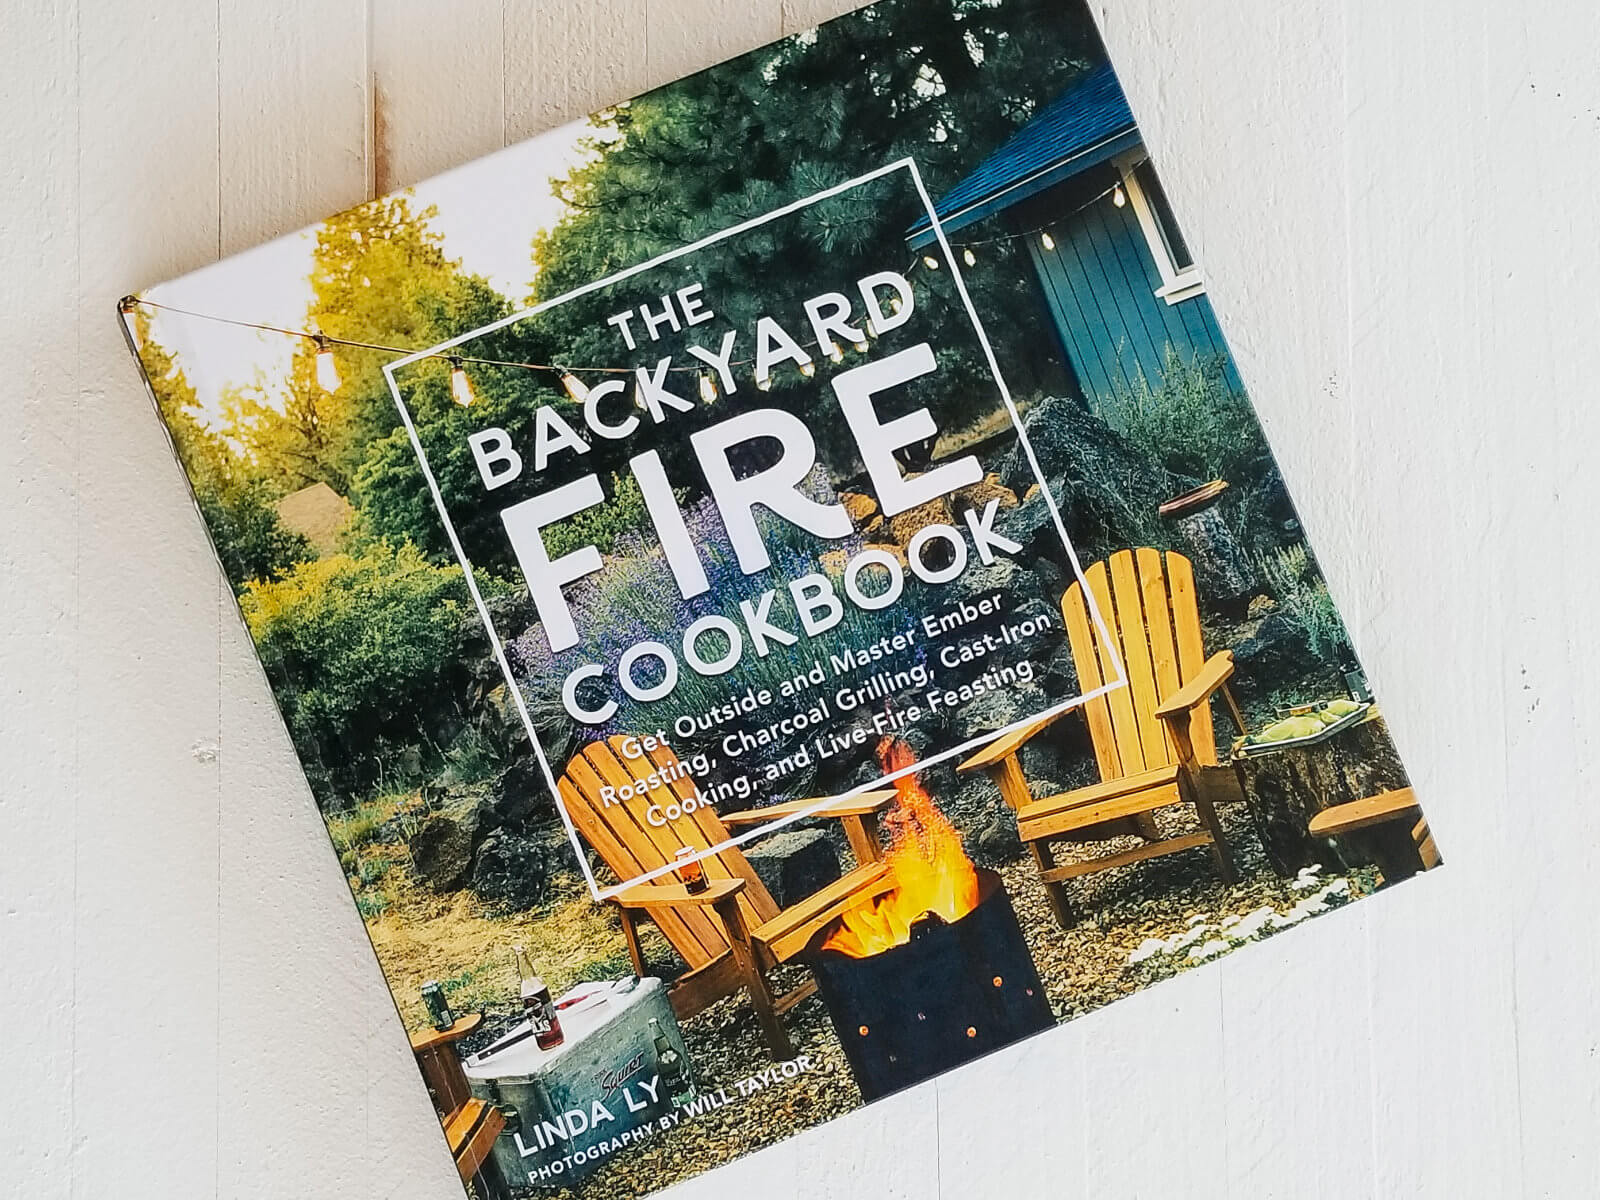 The Backyard Fire Cookbook is coming May 14! Here's a look inside